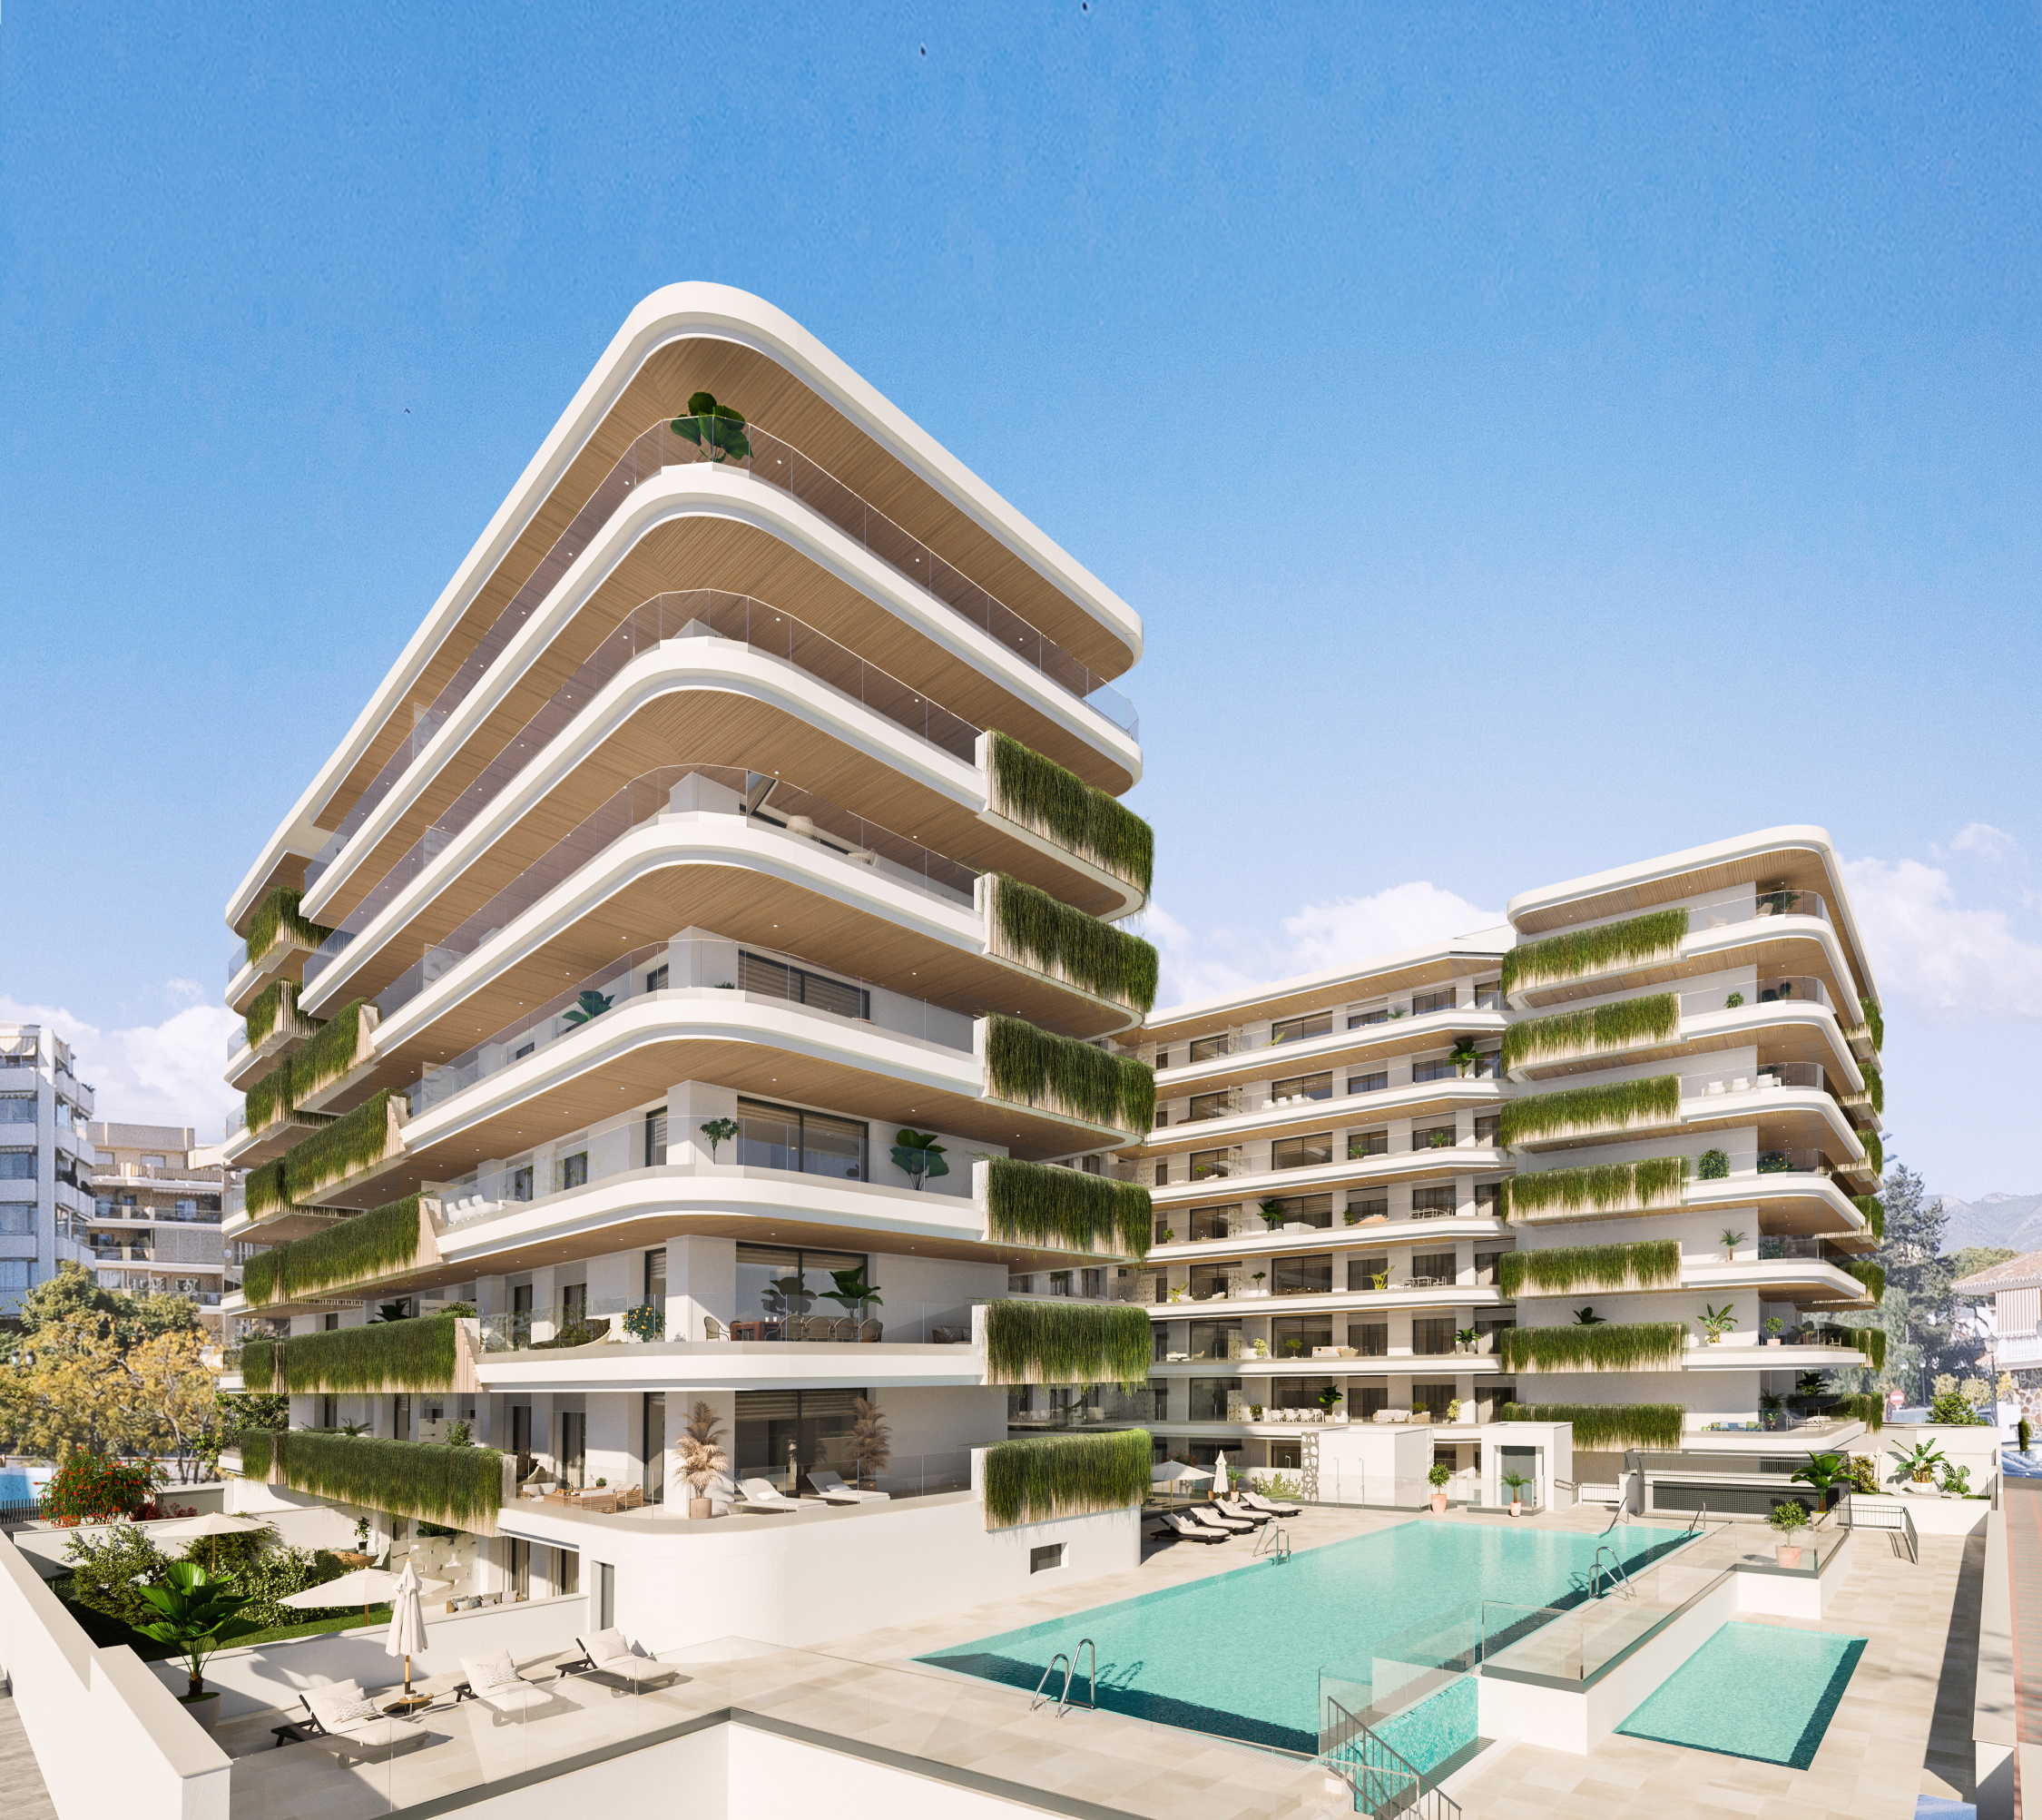 Cordia starts construction of luxury apartments in Spain